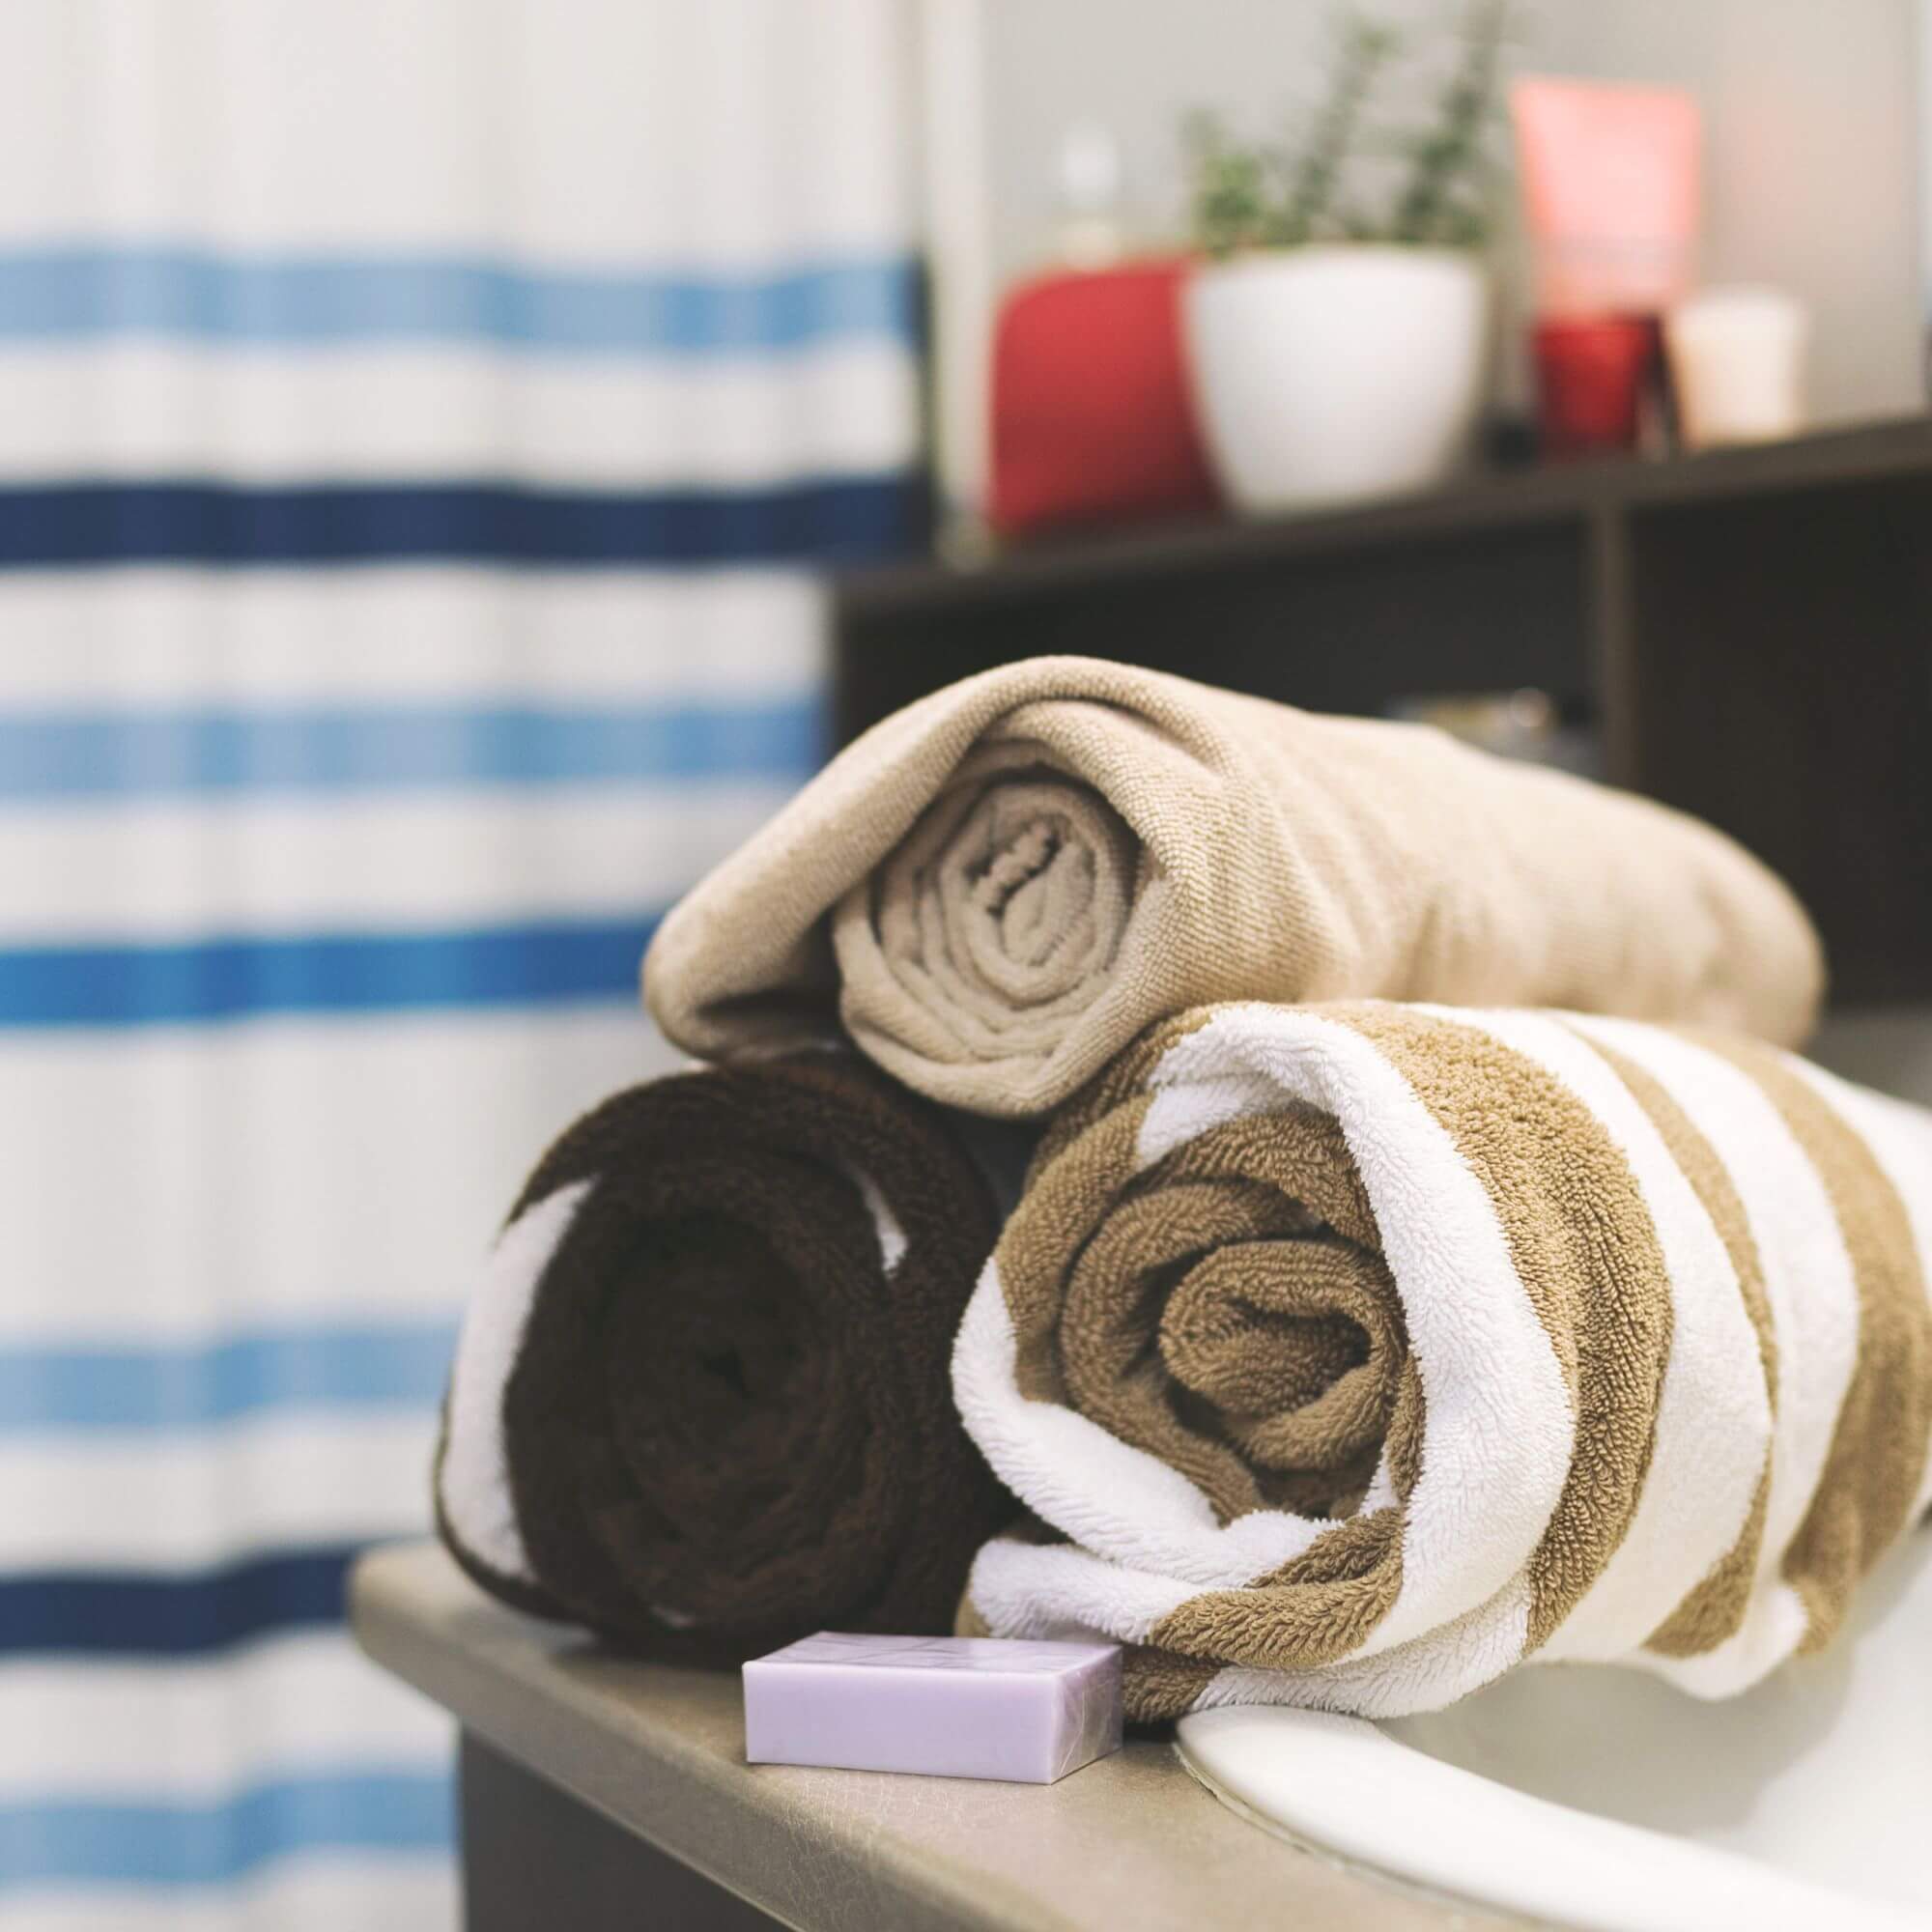 Three striped guest towels sit on a bathroom vanity with a bar of purple soap.